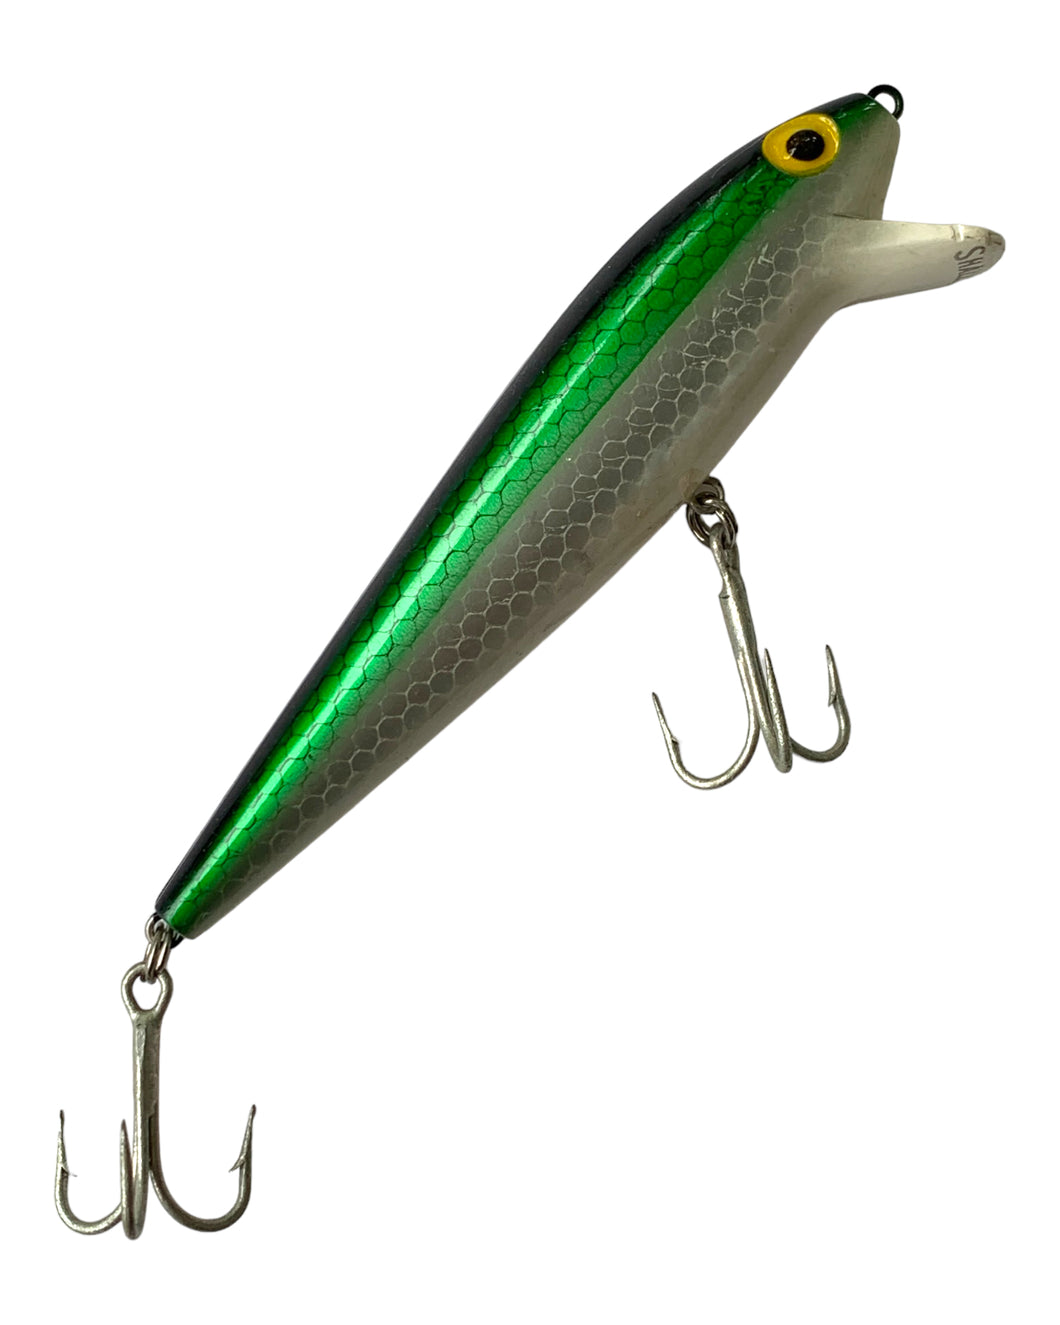 Storm Manufacturing Company SHALLOMAC Fishing Lure • DN-6 GREEN SCALE